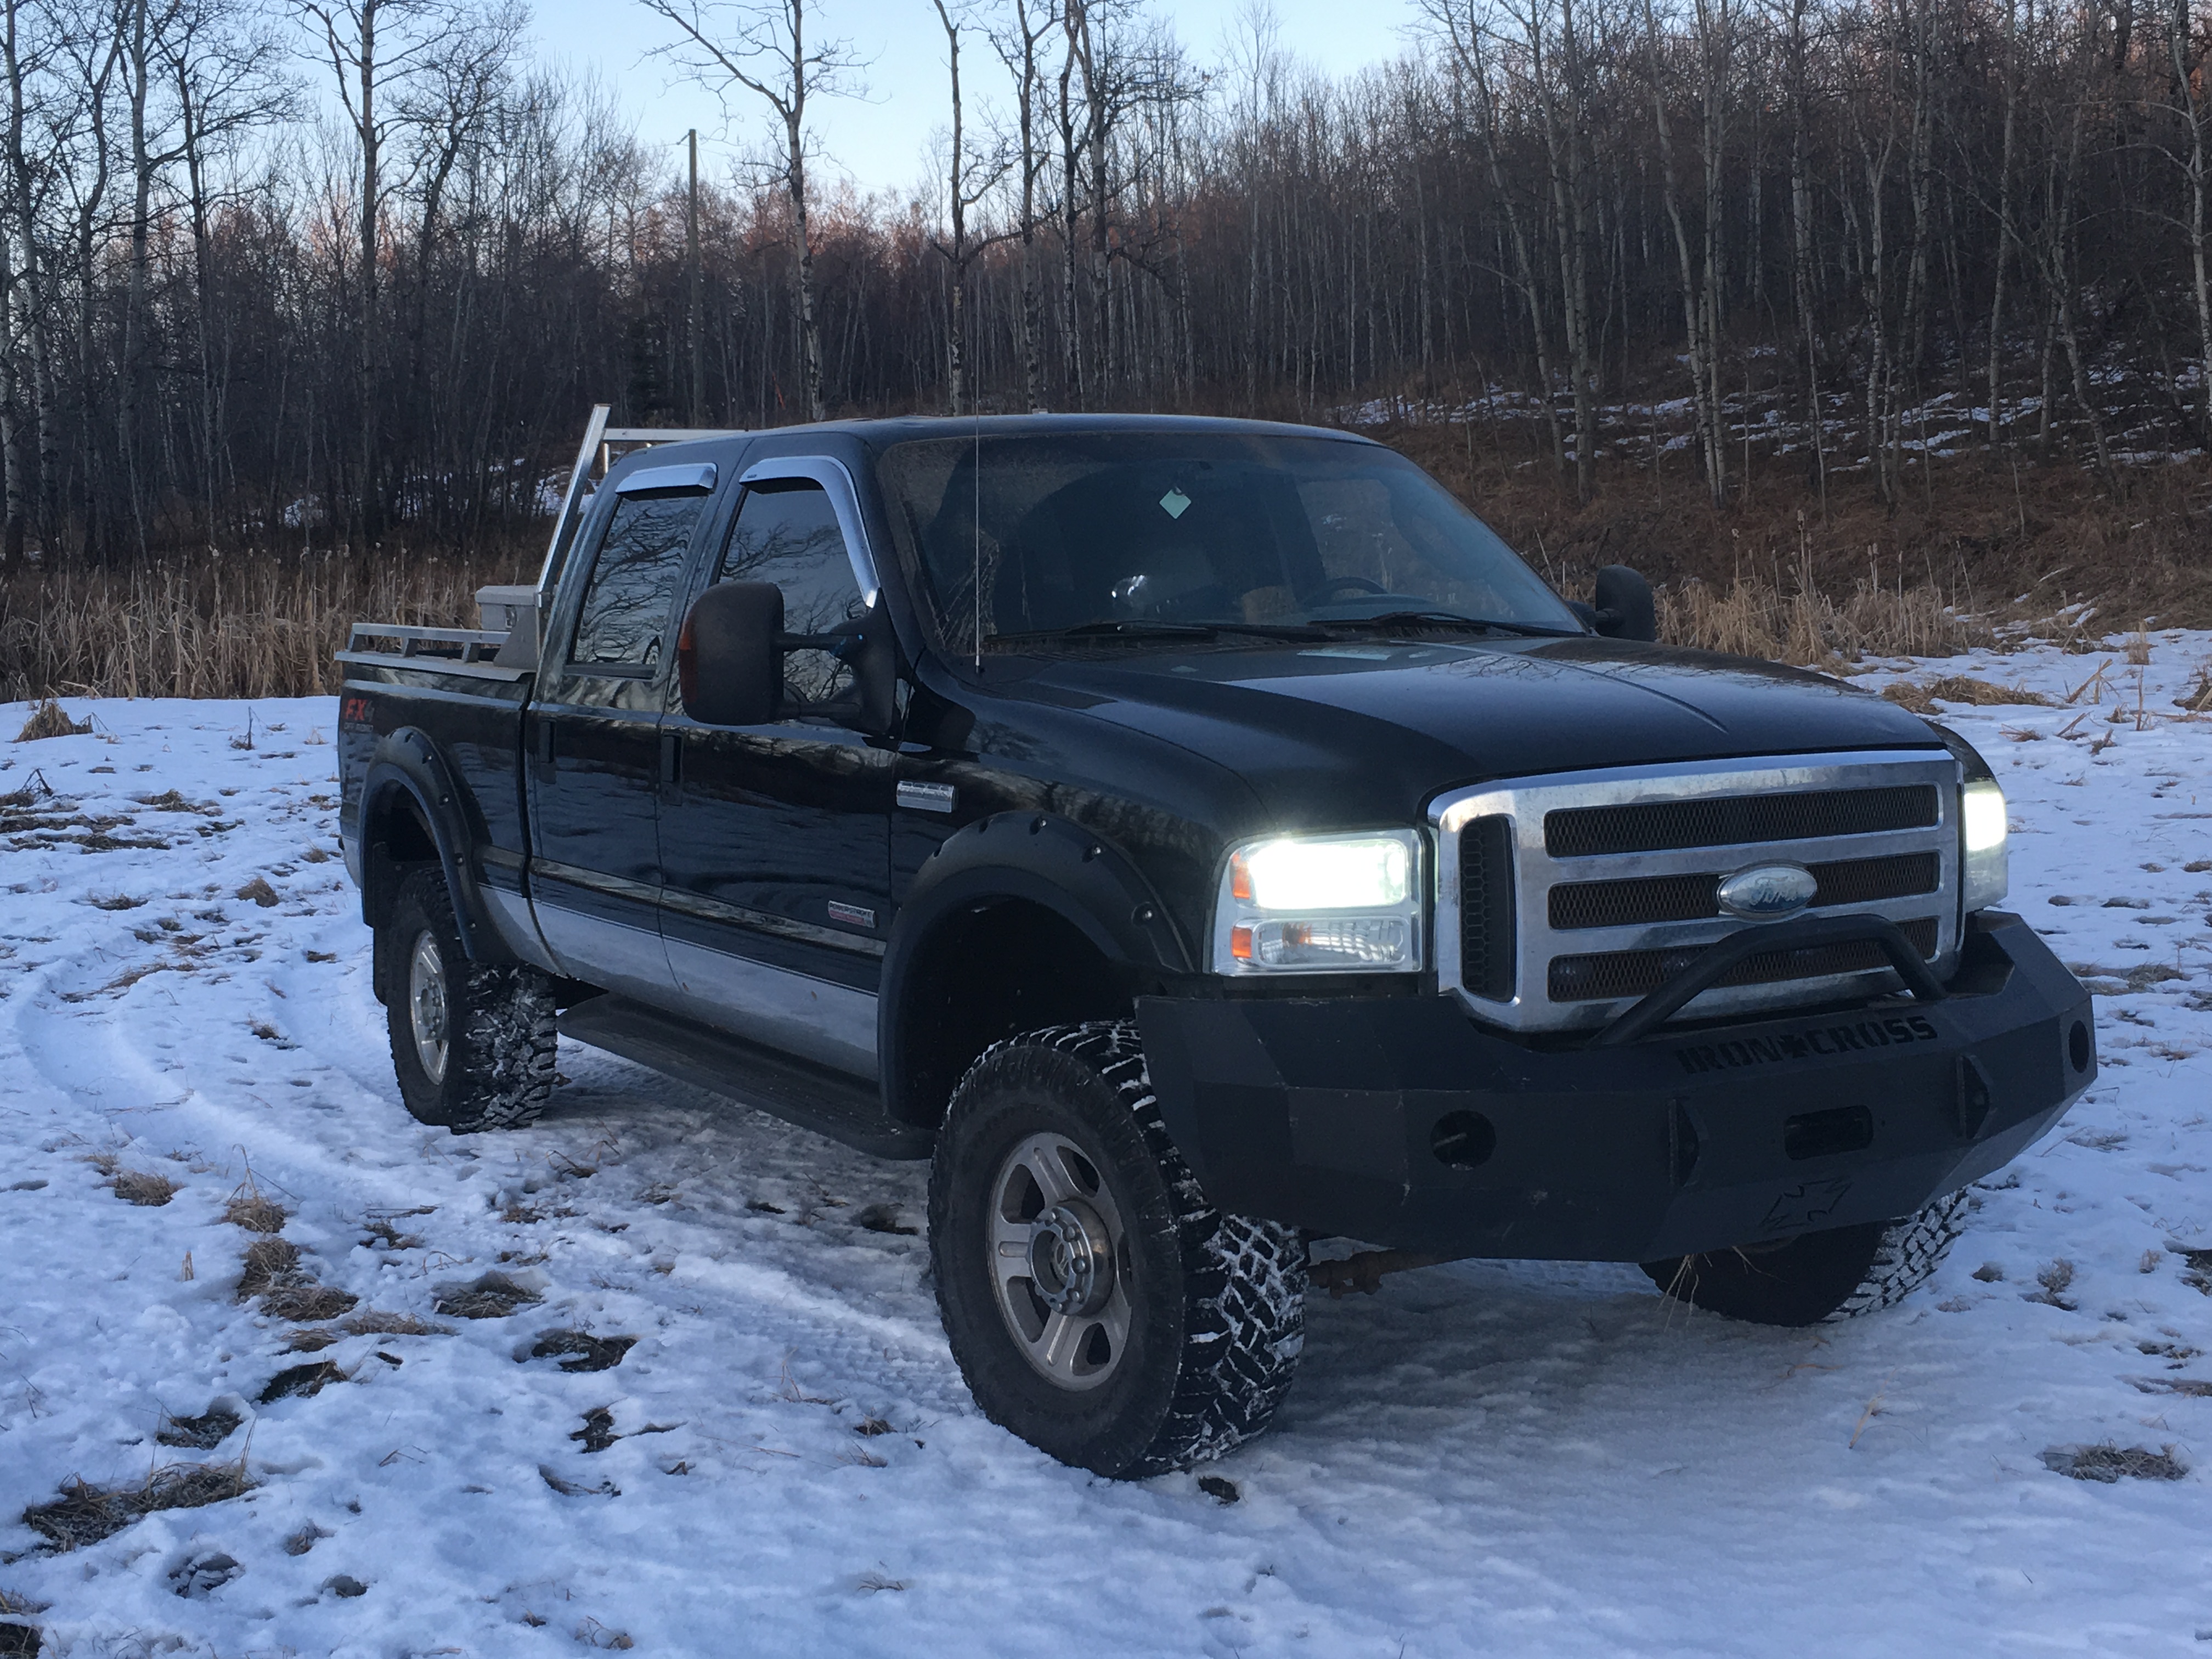 Turner Valley RCMP – Theft of Truck